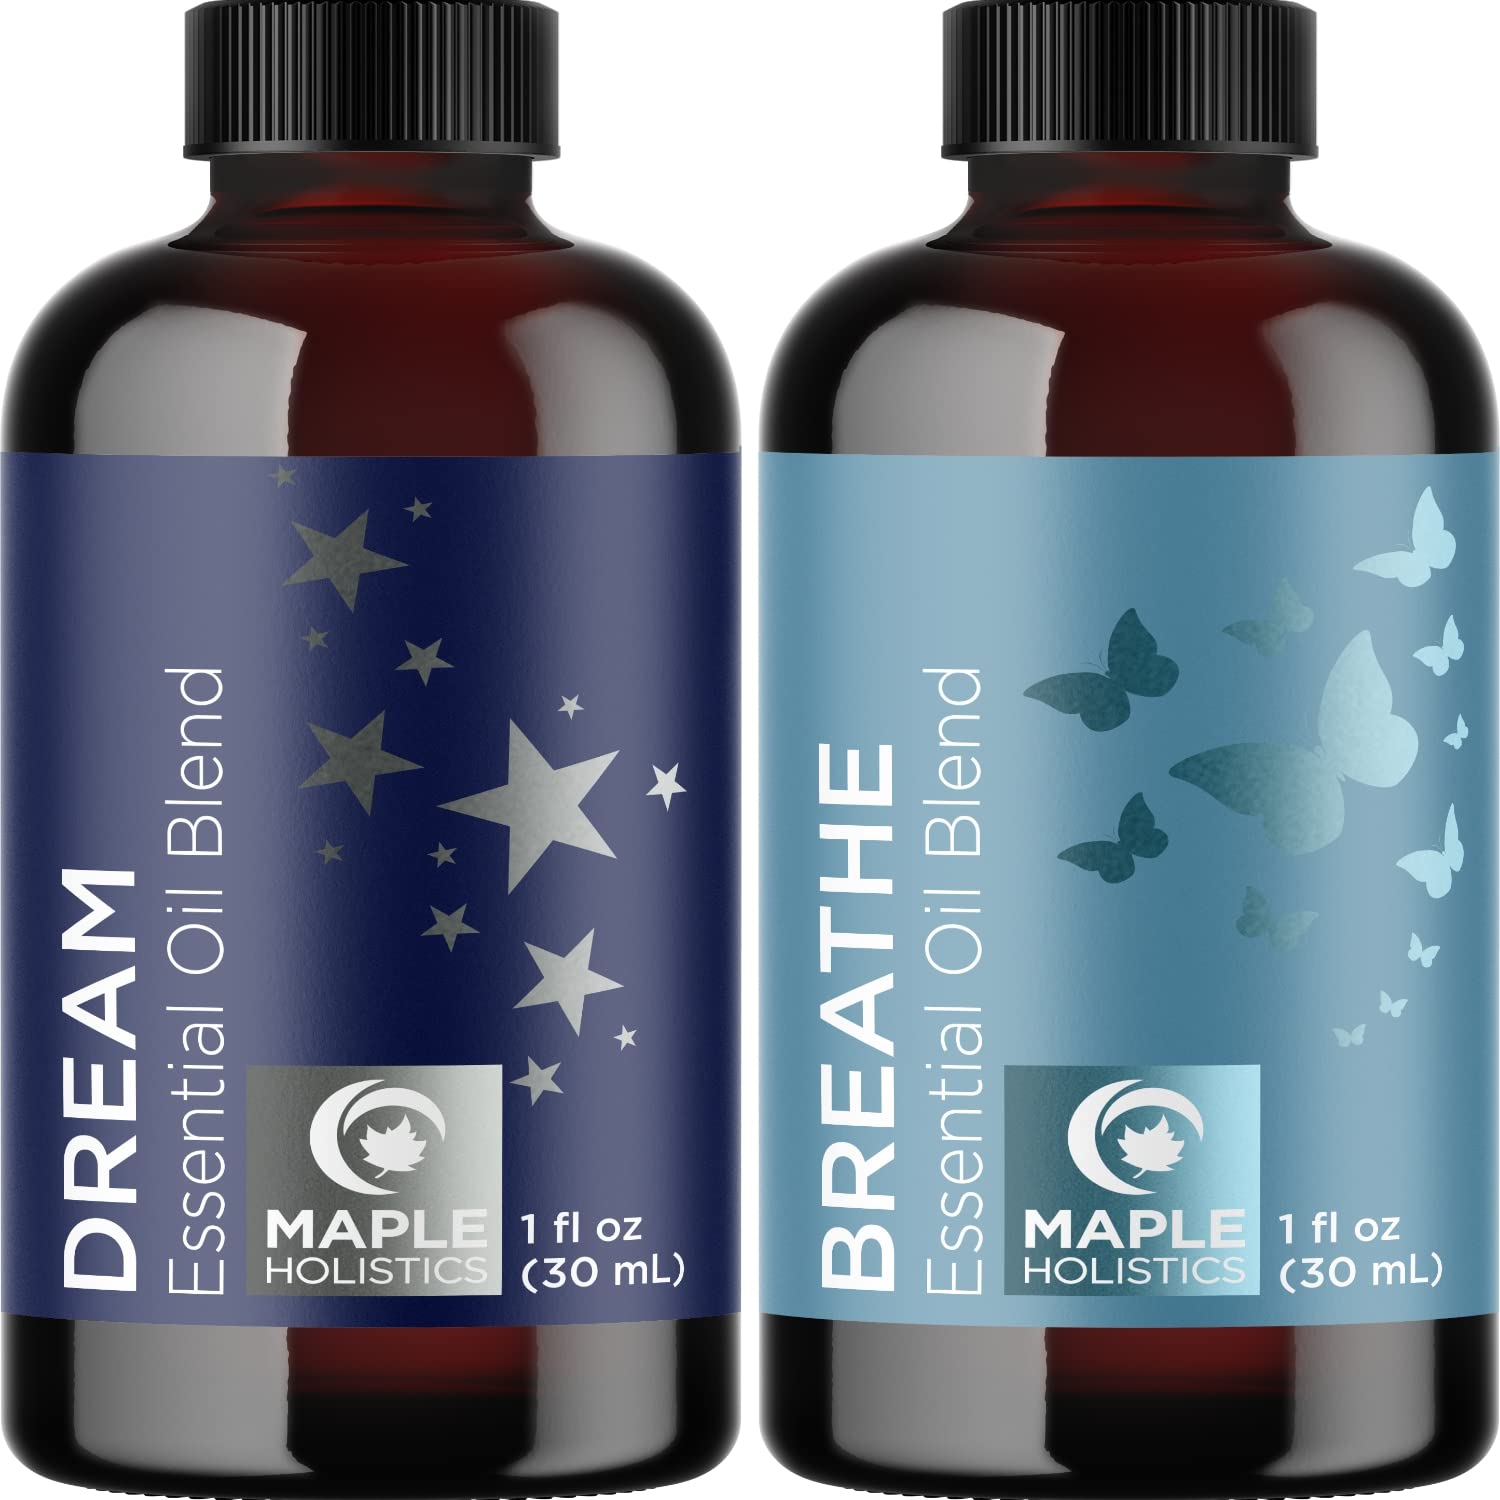 Aromatherapy Essential Oils Blends Set - Dream and Breathe Essential Oil Set for Diffuser with Sleep and Relaxing Essential Oils for Diffusers Aromatherapy - Best Essential Oils Set for Diffuser